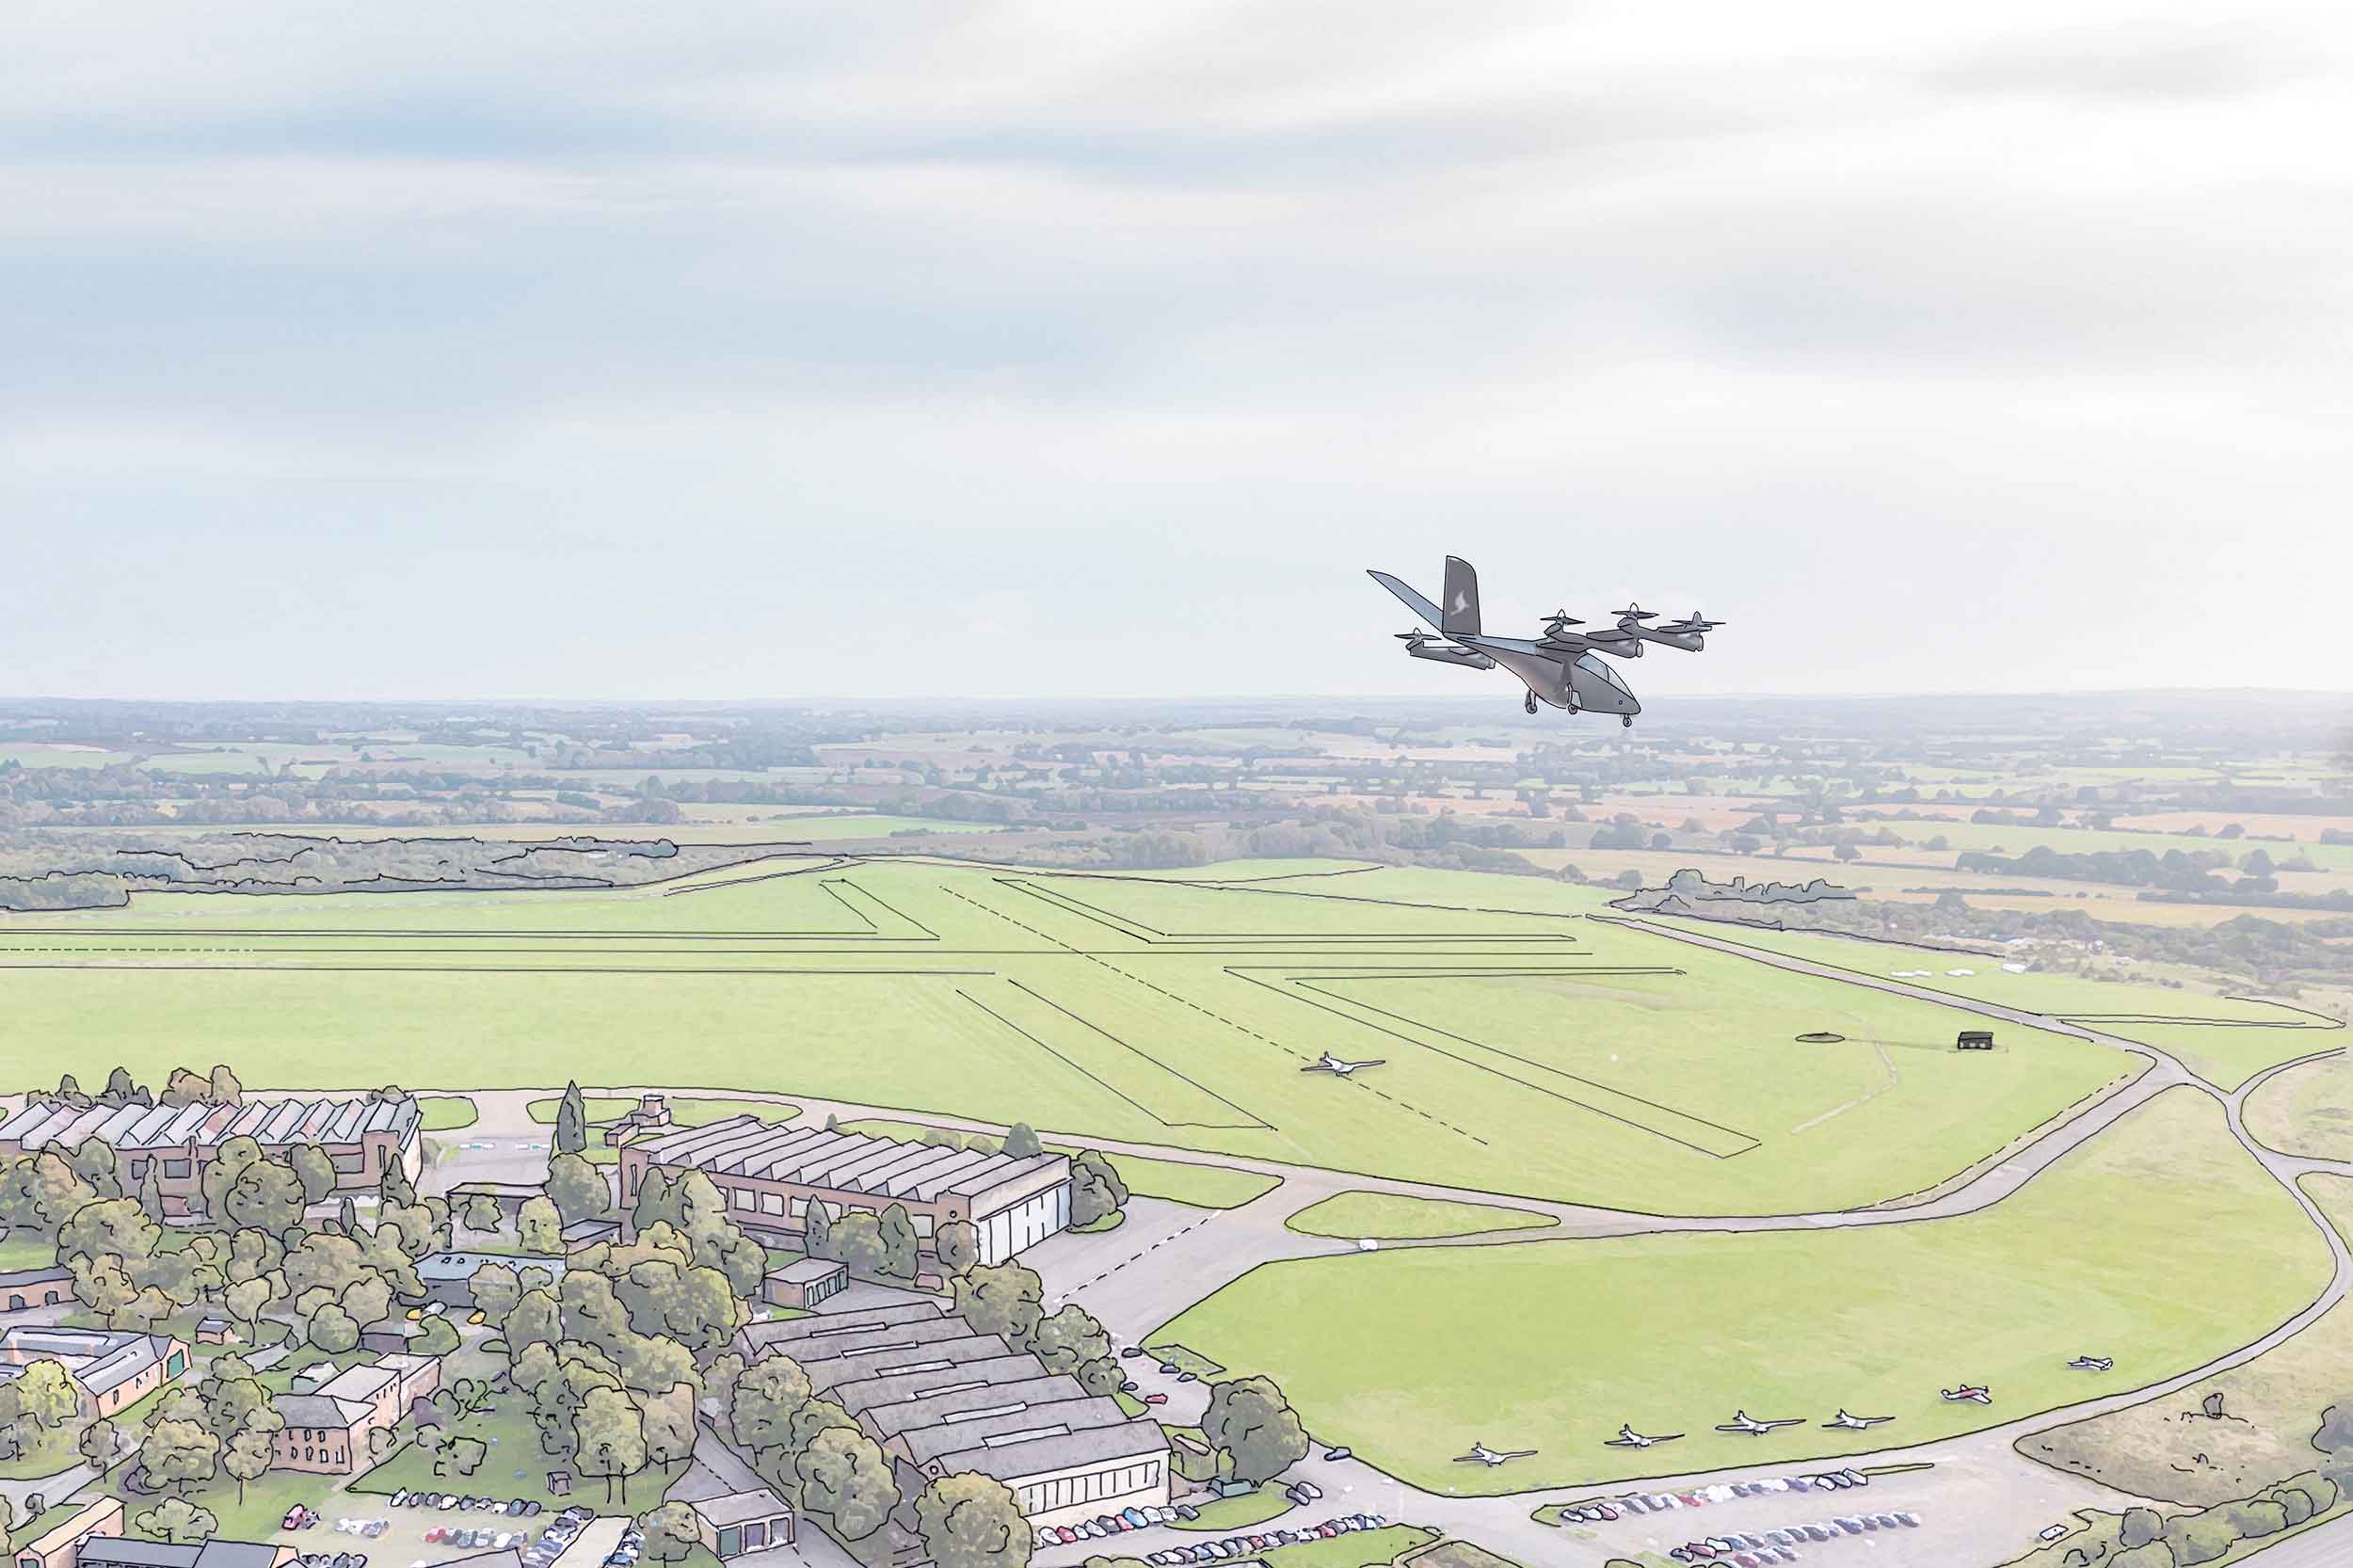 Artist's impression showing a Vertical Aerospace VX4 electric air taxi approaching to land at Bicester